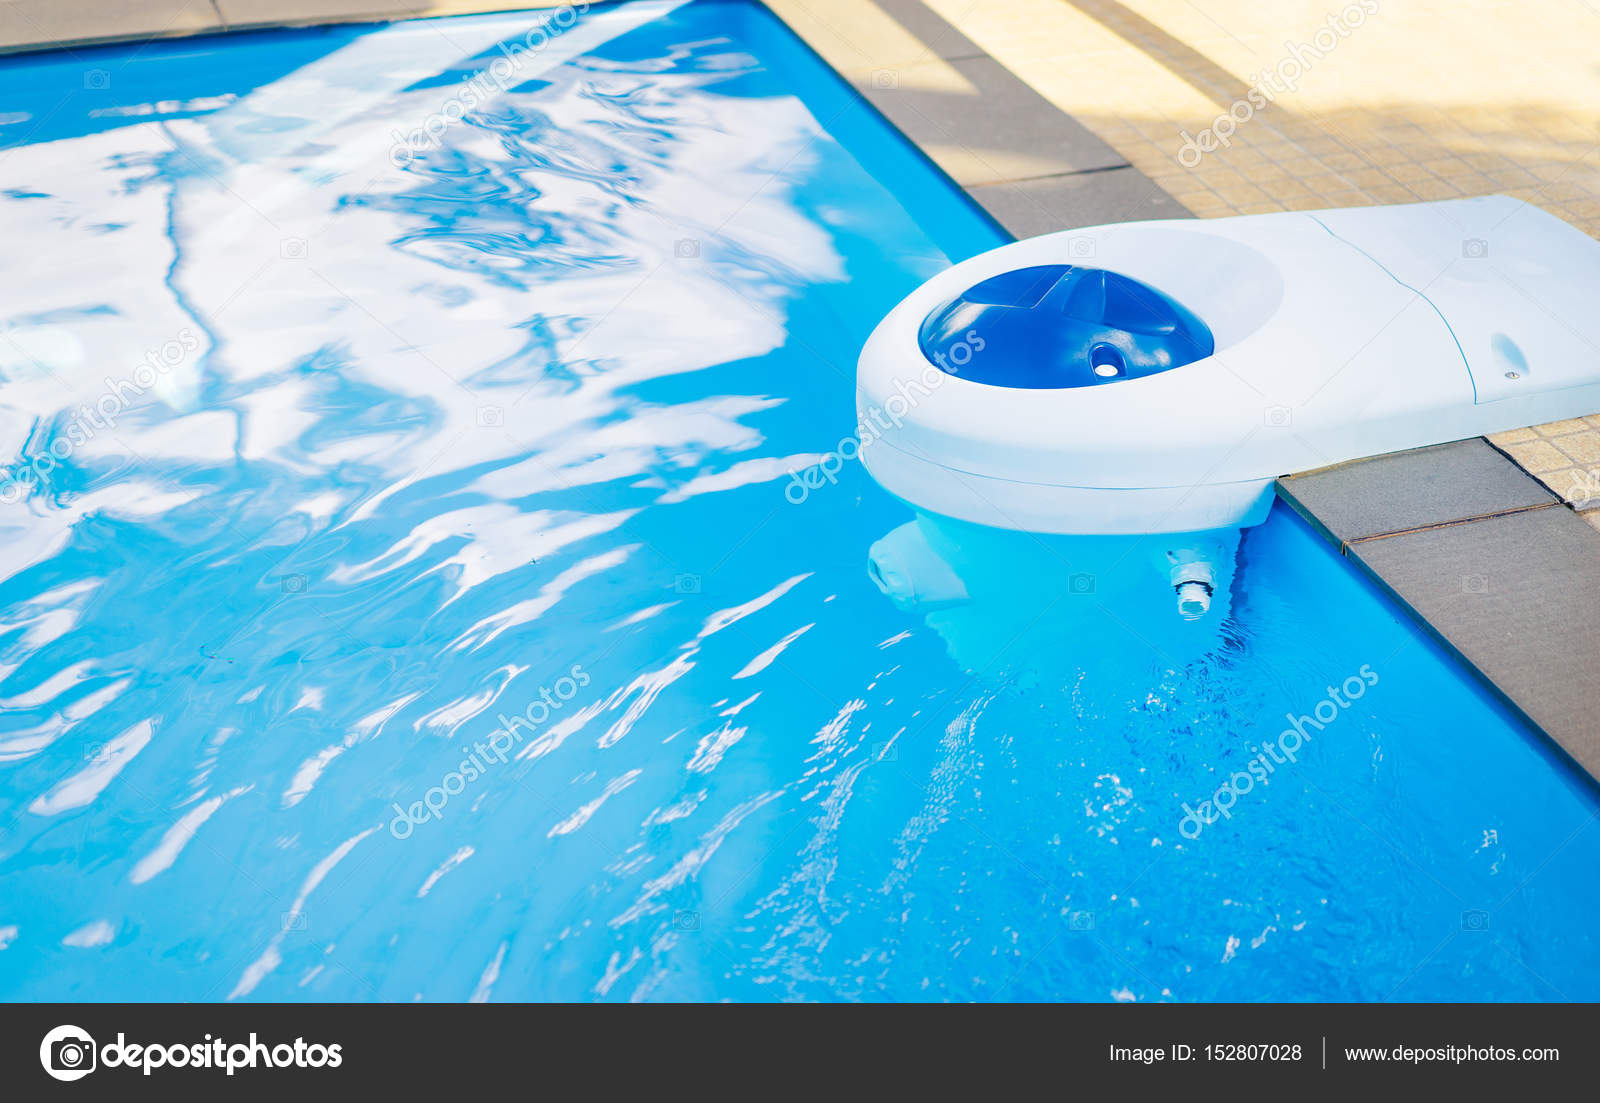 Bliss in your Pool but How: Water Tech